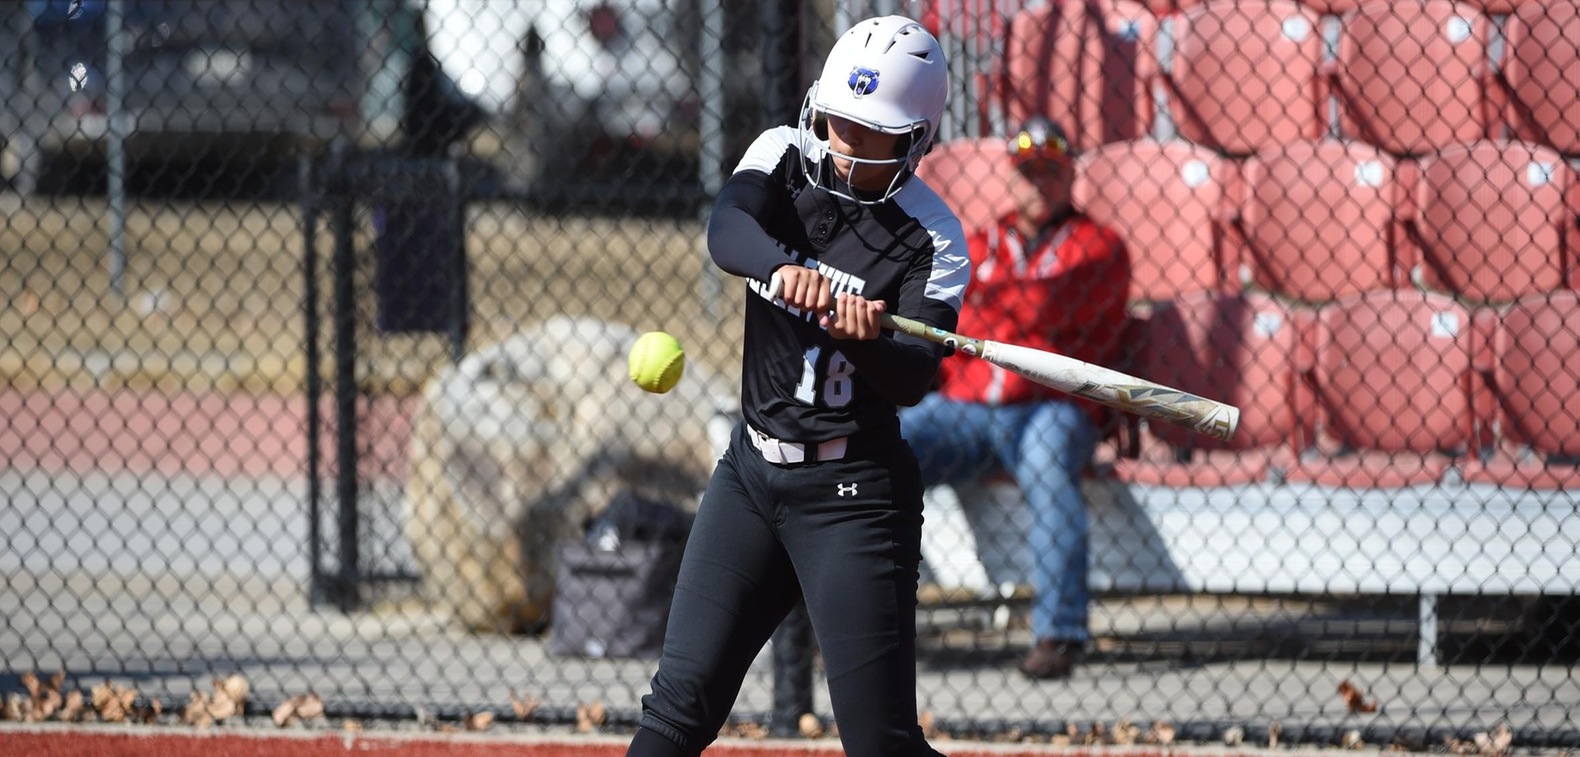 Liana McMurtry finished the day 6-for-8 with five RBIs and a home run.